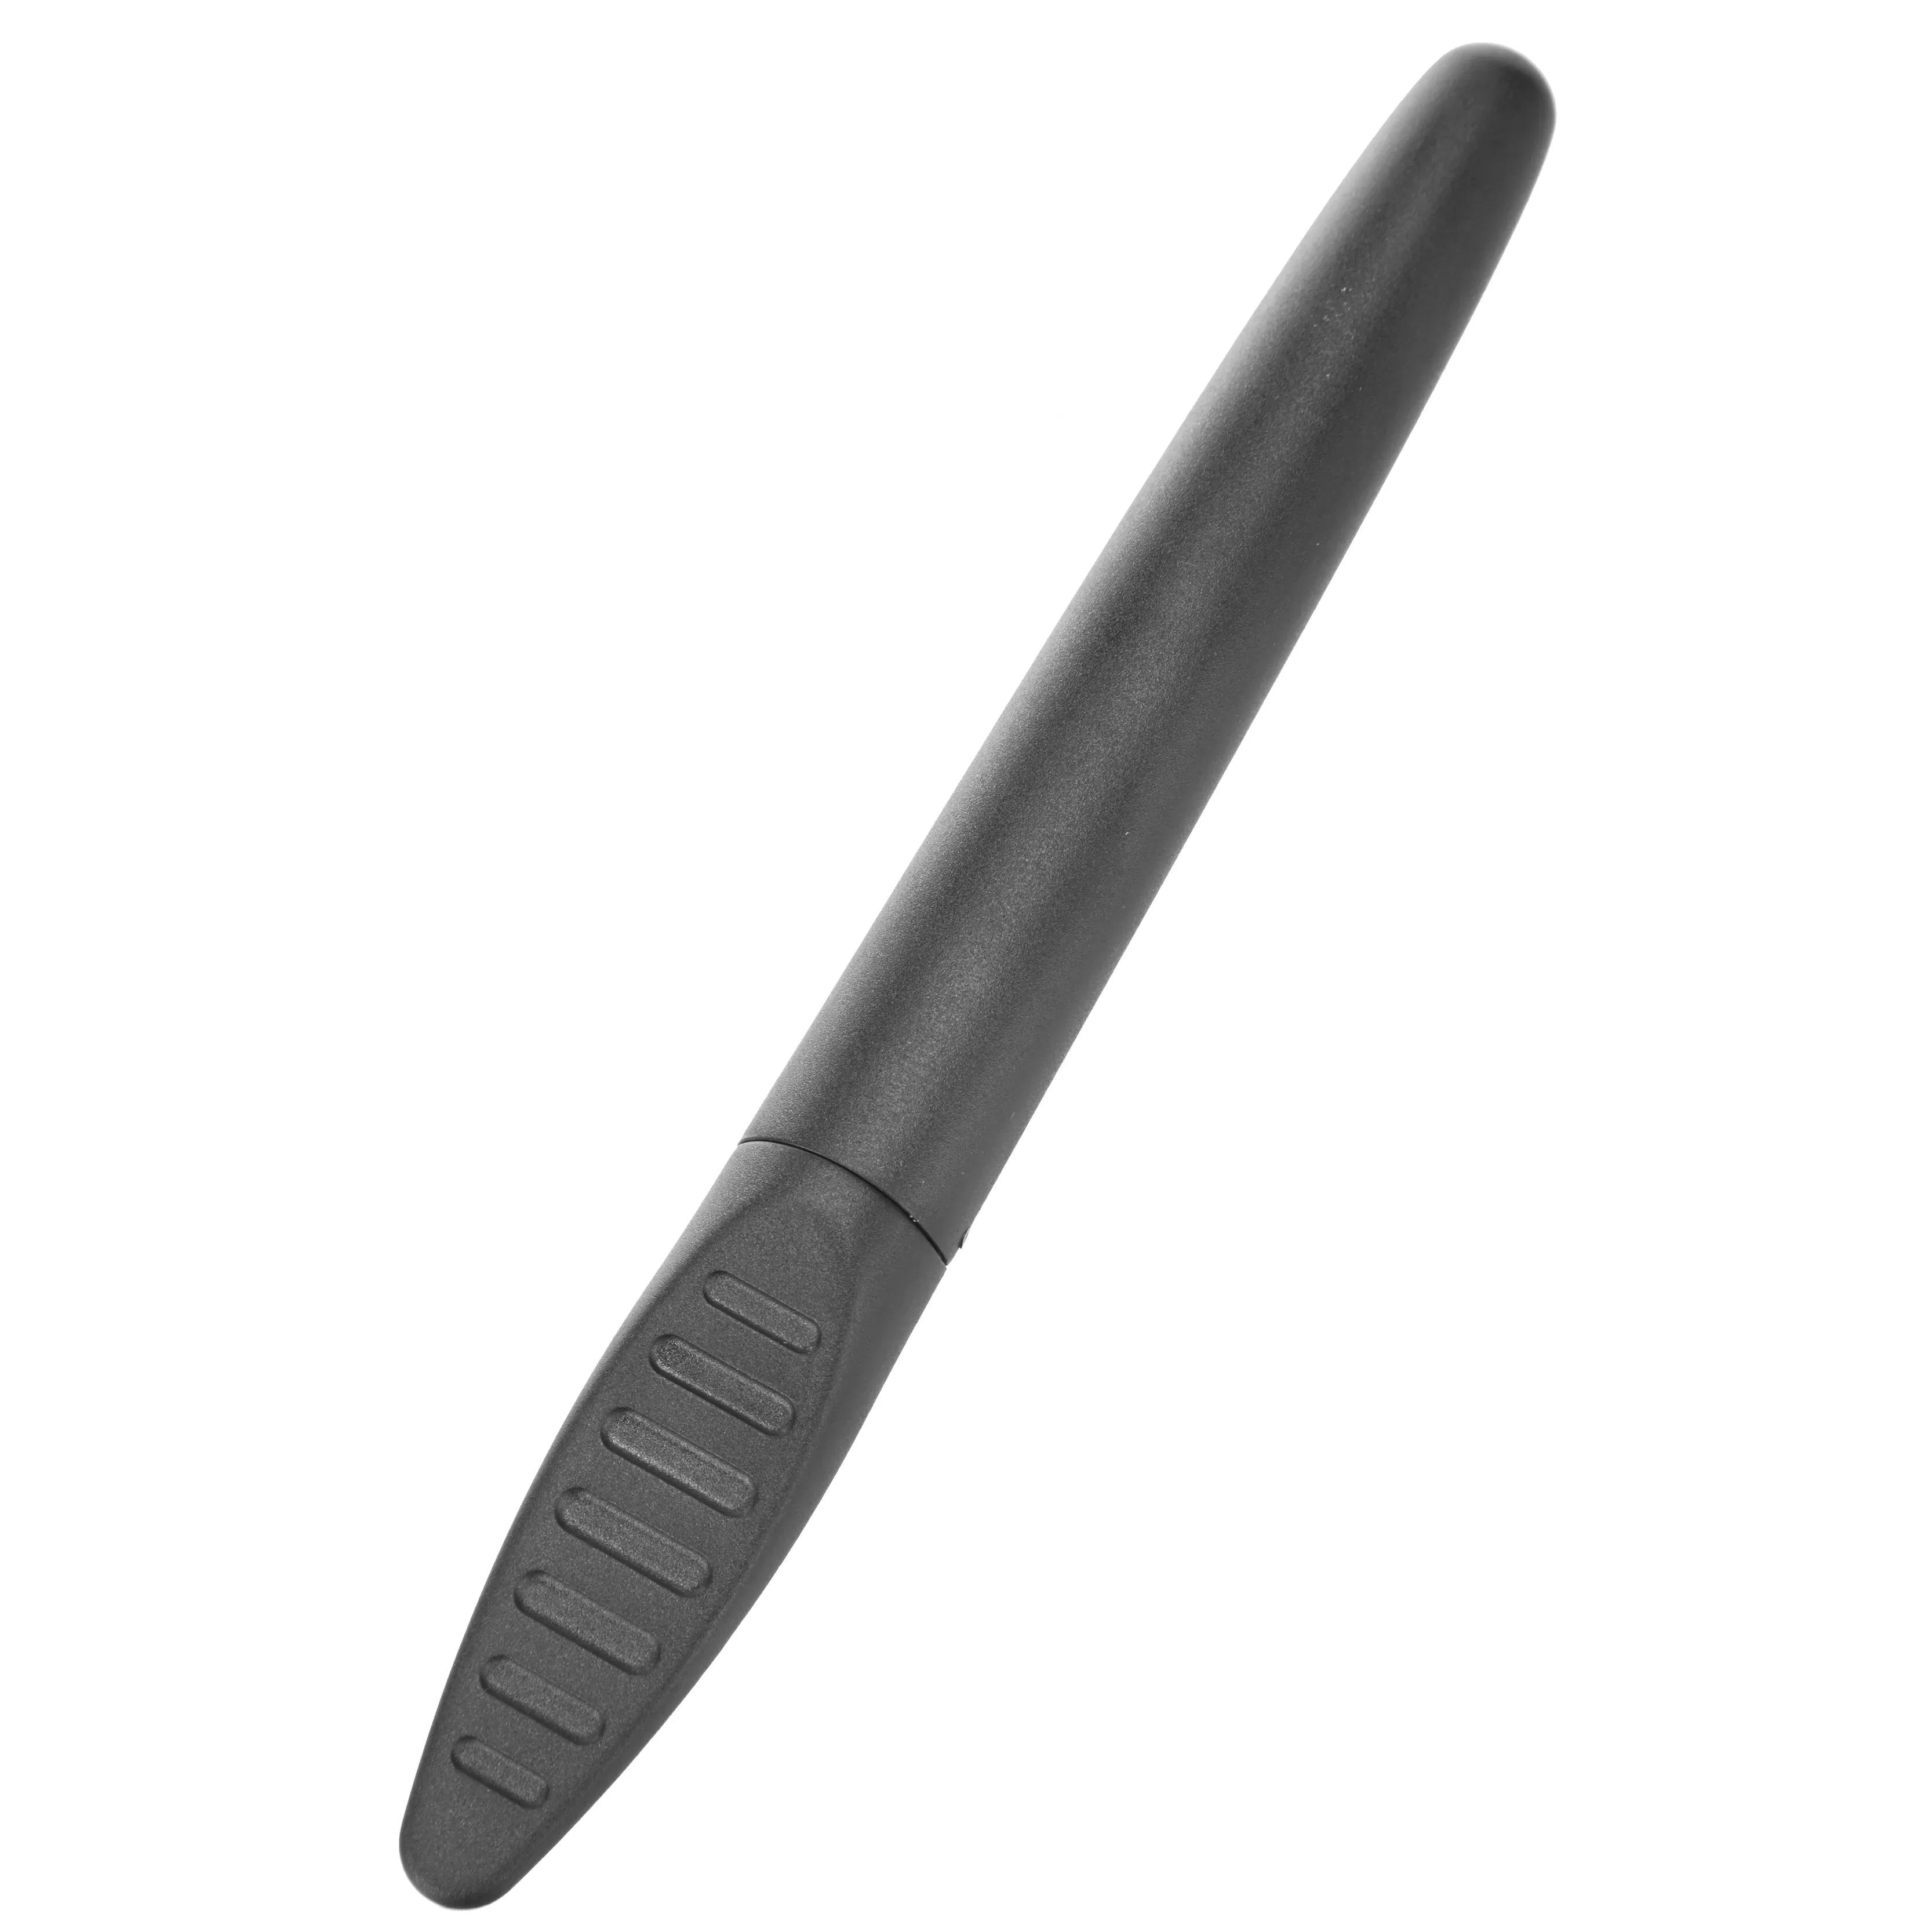 Zwilling Ceramic nail file 16 cm - silver polished